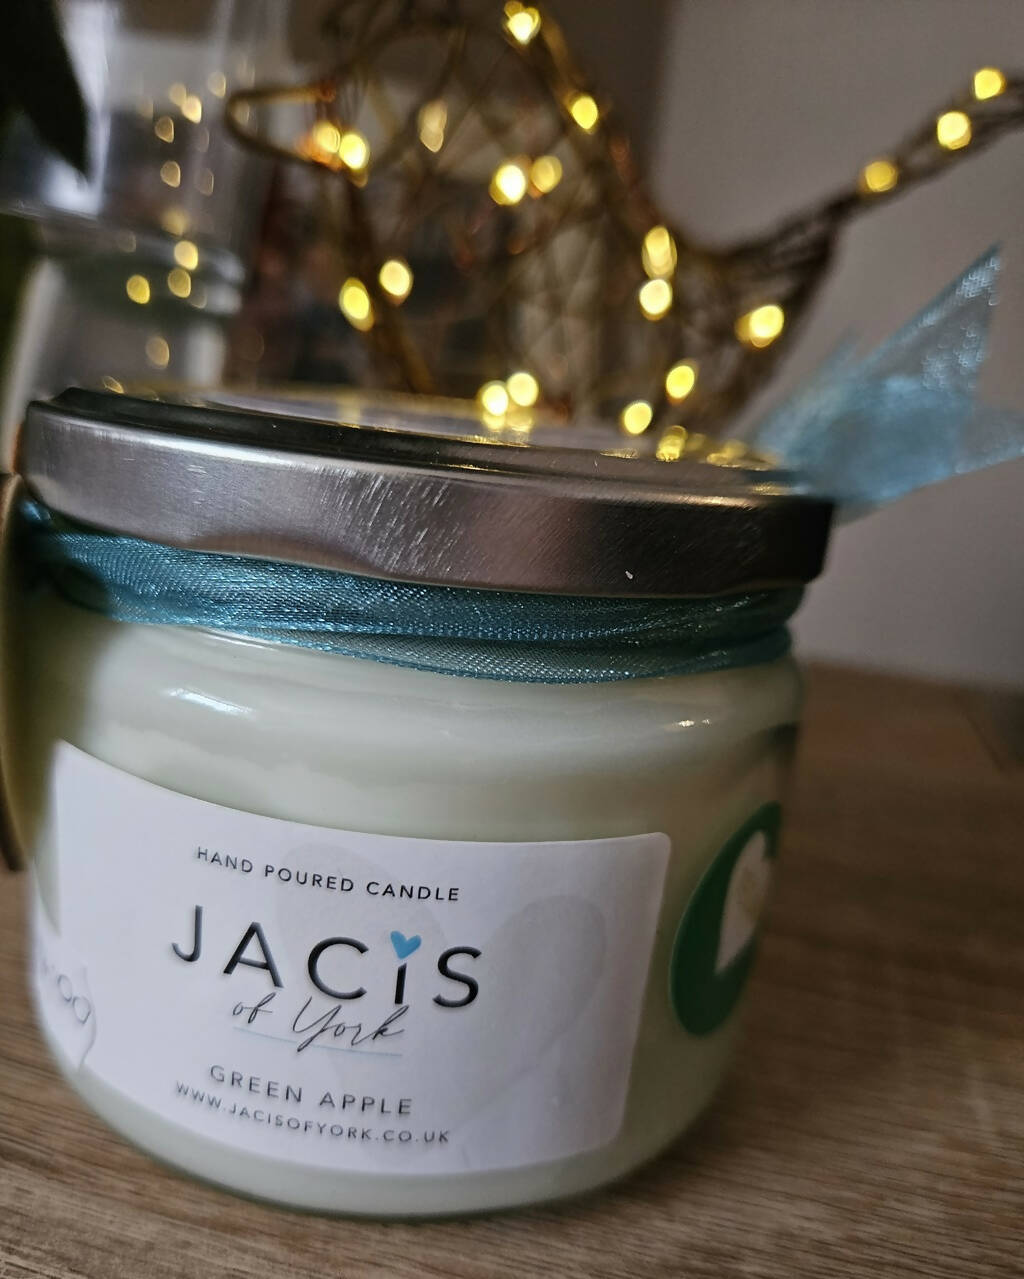 Jacis of York 250ml Scented Candle - Green Apple